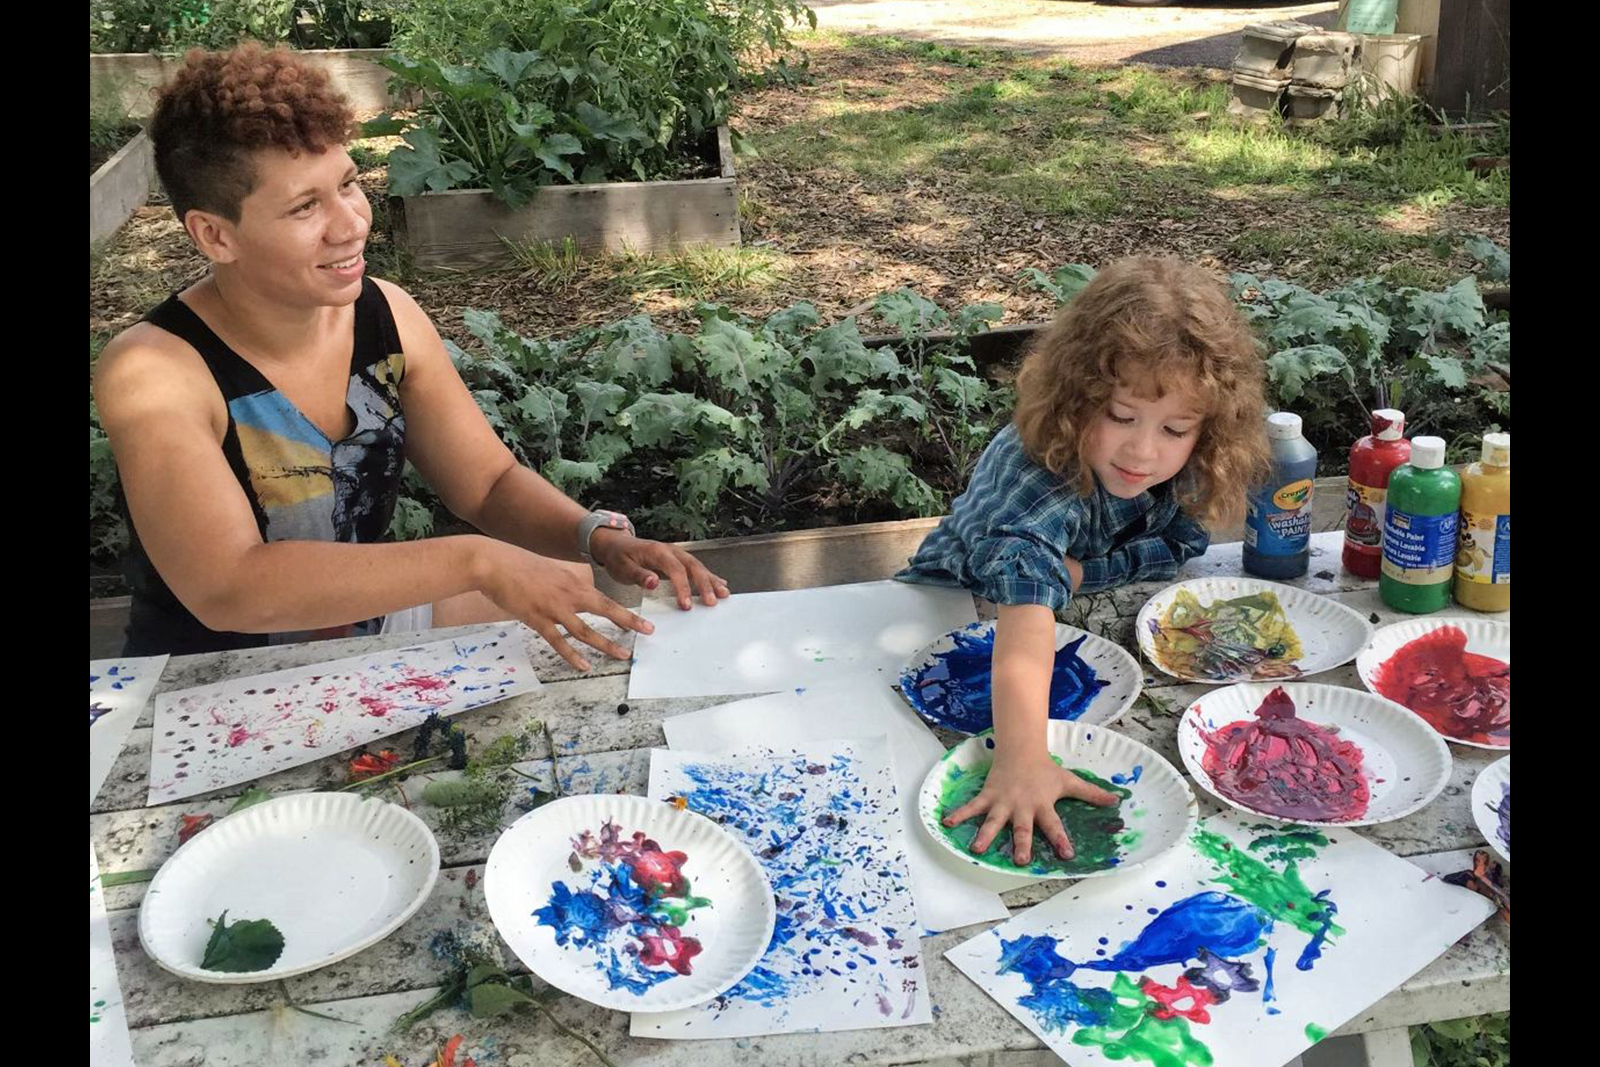 A teaching artist and young girl sit at a table outdoors full of finger paints